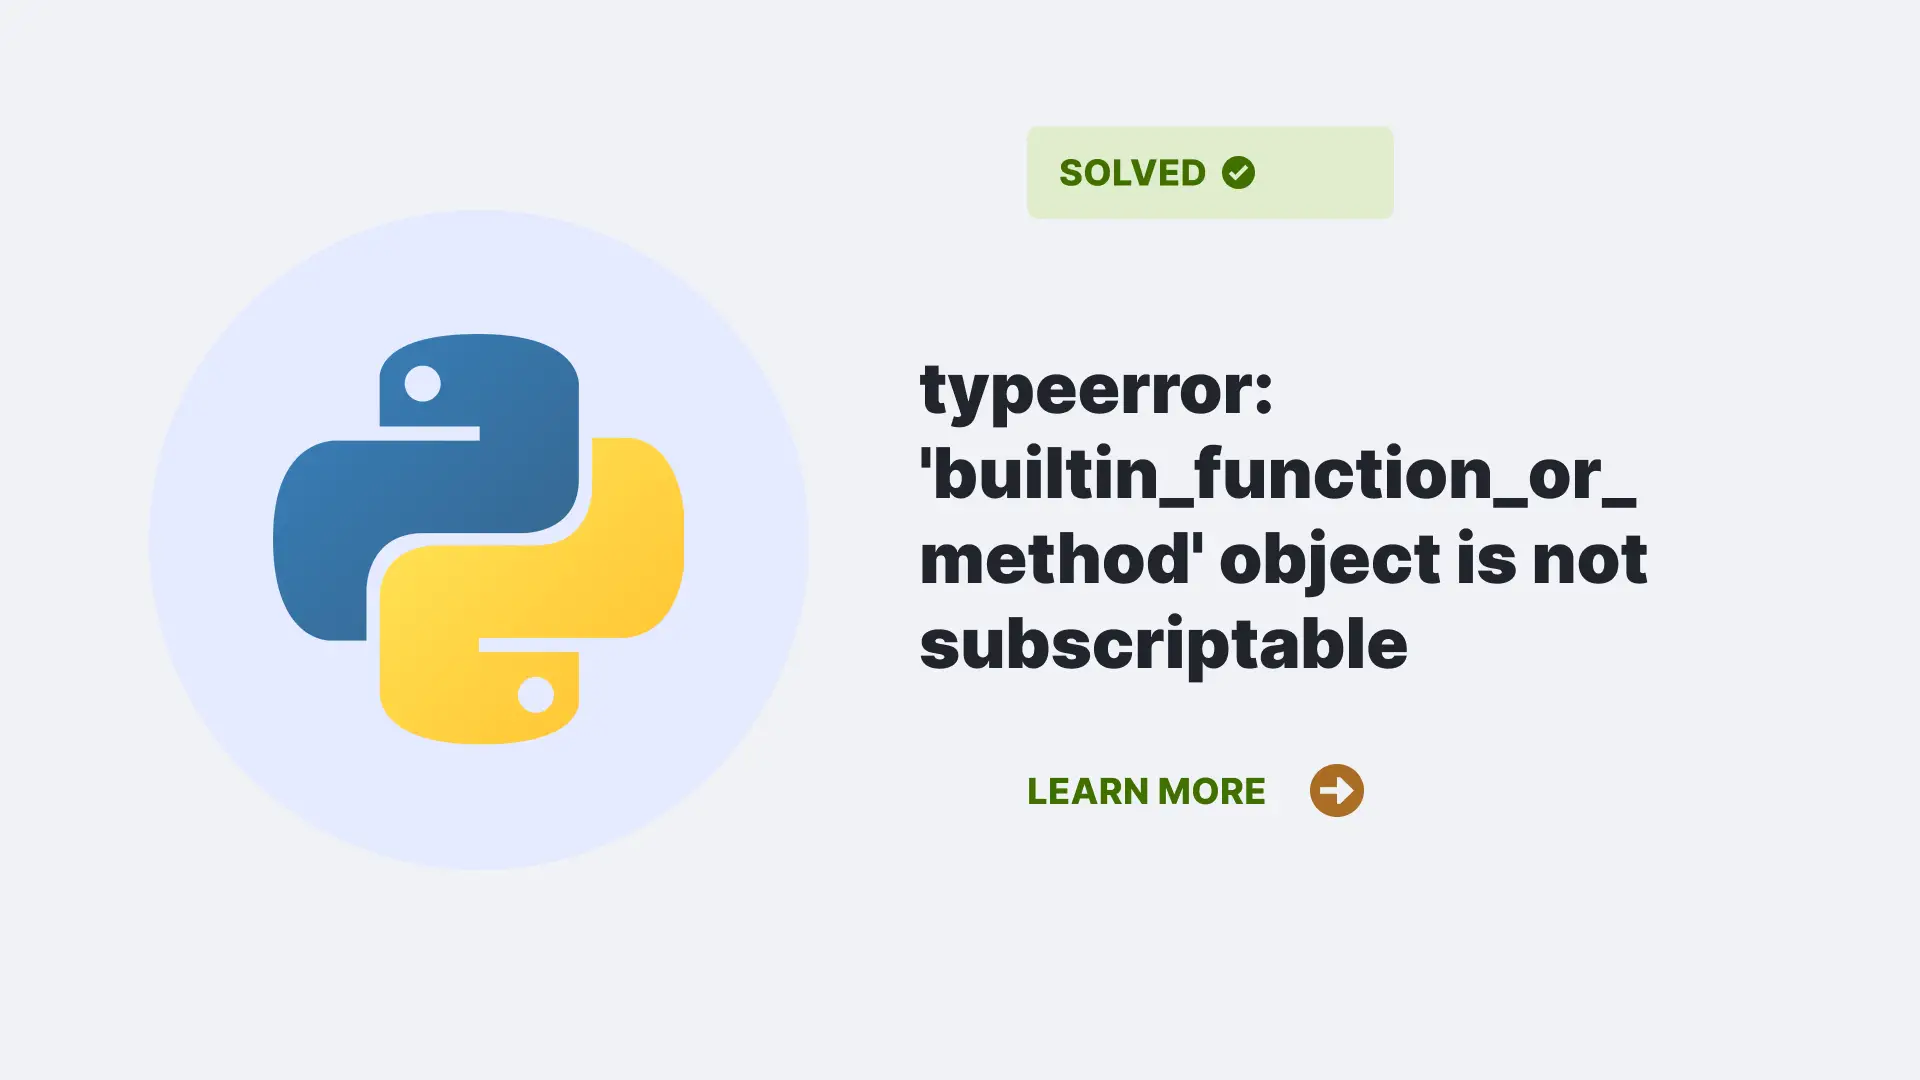 typeerror: 'builtin_function_or_method' object is not subscriptable